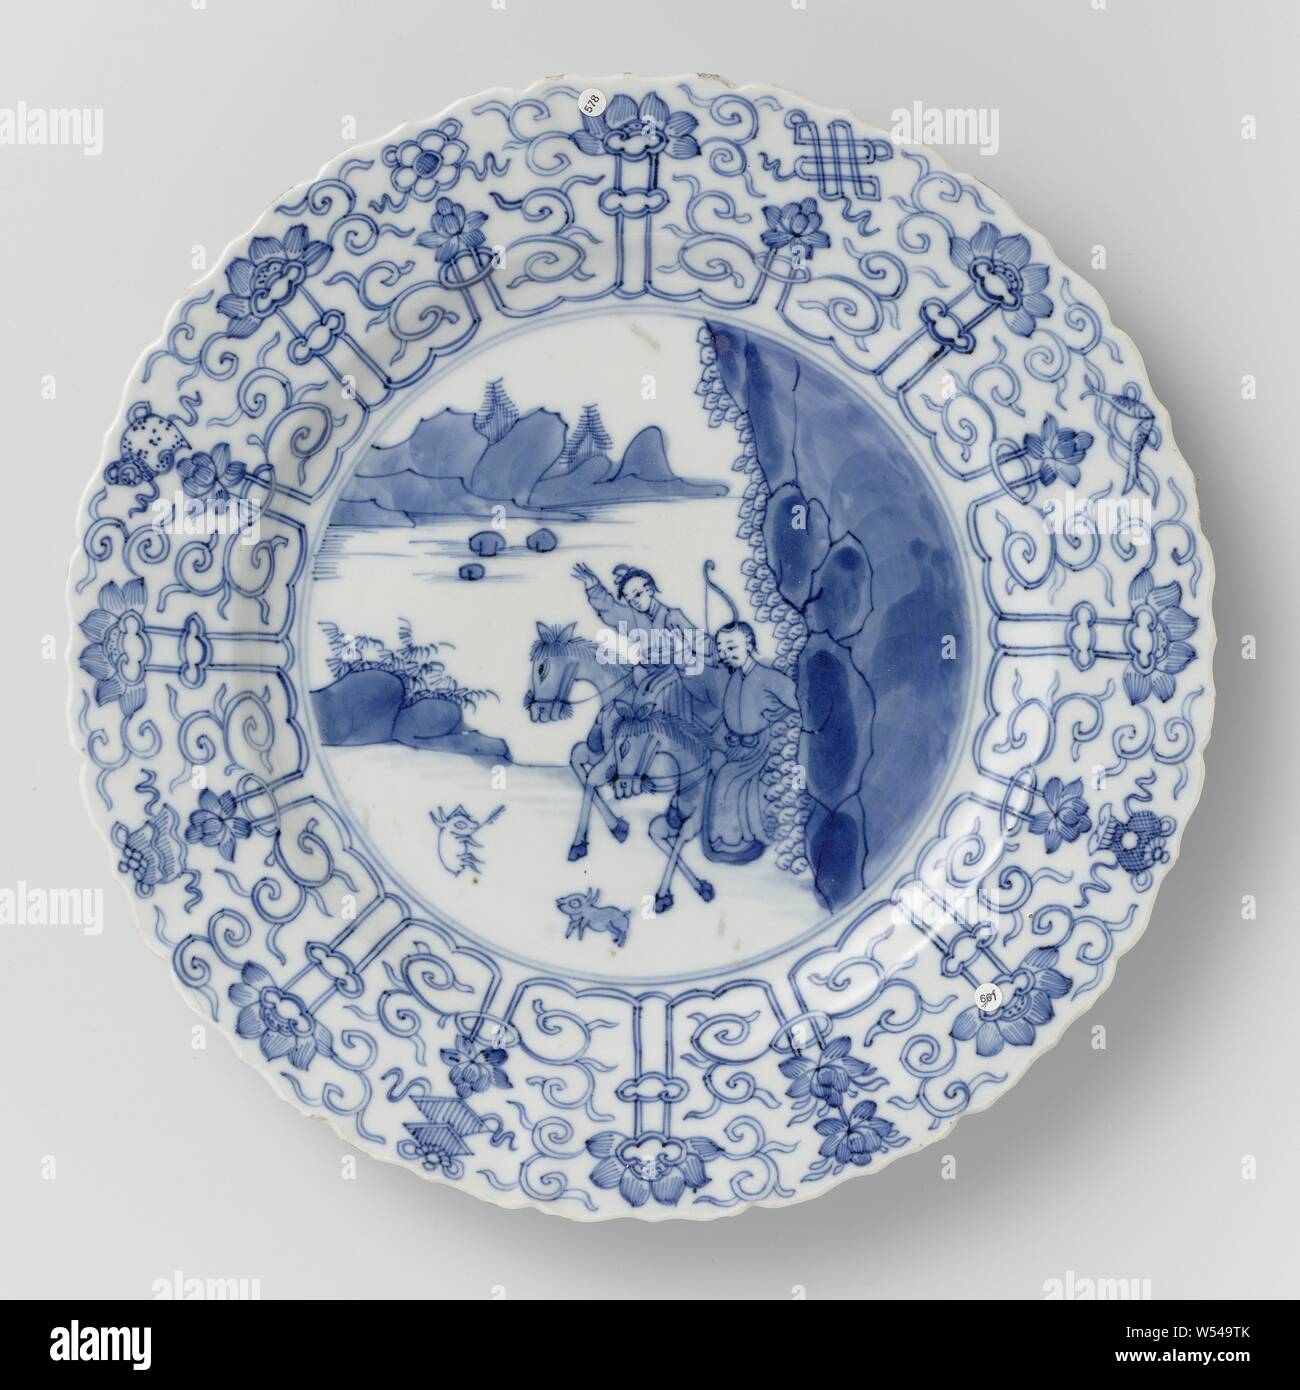 https://c8.alamy.com/comp/W549TK/saucer-dish-with-hunting-scene-lotus-scrolls-and-auspicious-symbols-porcelain-dish-with-round-ribbed-wall-and-scalloped-edge-painted-in-underglaze-blue-on-the-flat-a-hunting-scene-with-two-armed-horsemen-in-a-landscape-hunting-a-hare-the-border-with-a-concatenated-band-of-lotus-tendrils-between-which-the-eight-happiness-symbols-chakra-shell-parasol-canopy-lotus-vase-fish-infinite-knot-the-back-with-sixteen-separate-flower-sprays-marked-on-the-underside-with-the-six-character-mark-of-emperor-chenghua-in-a-double-circle-edge-slightly-damaged-blue-white-anonymous-china-c-W549TK.jpg